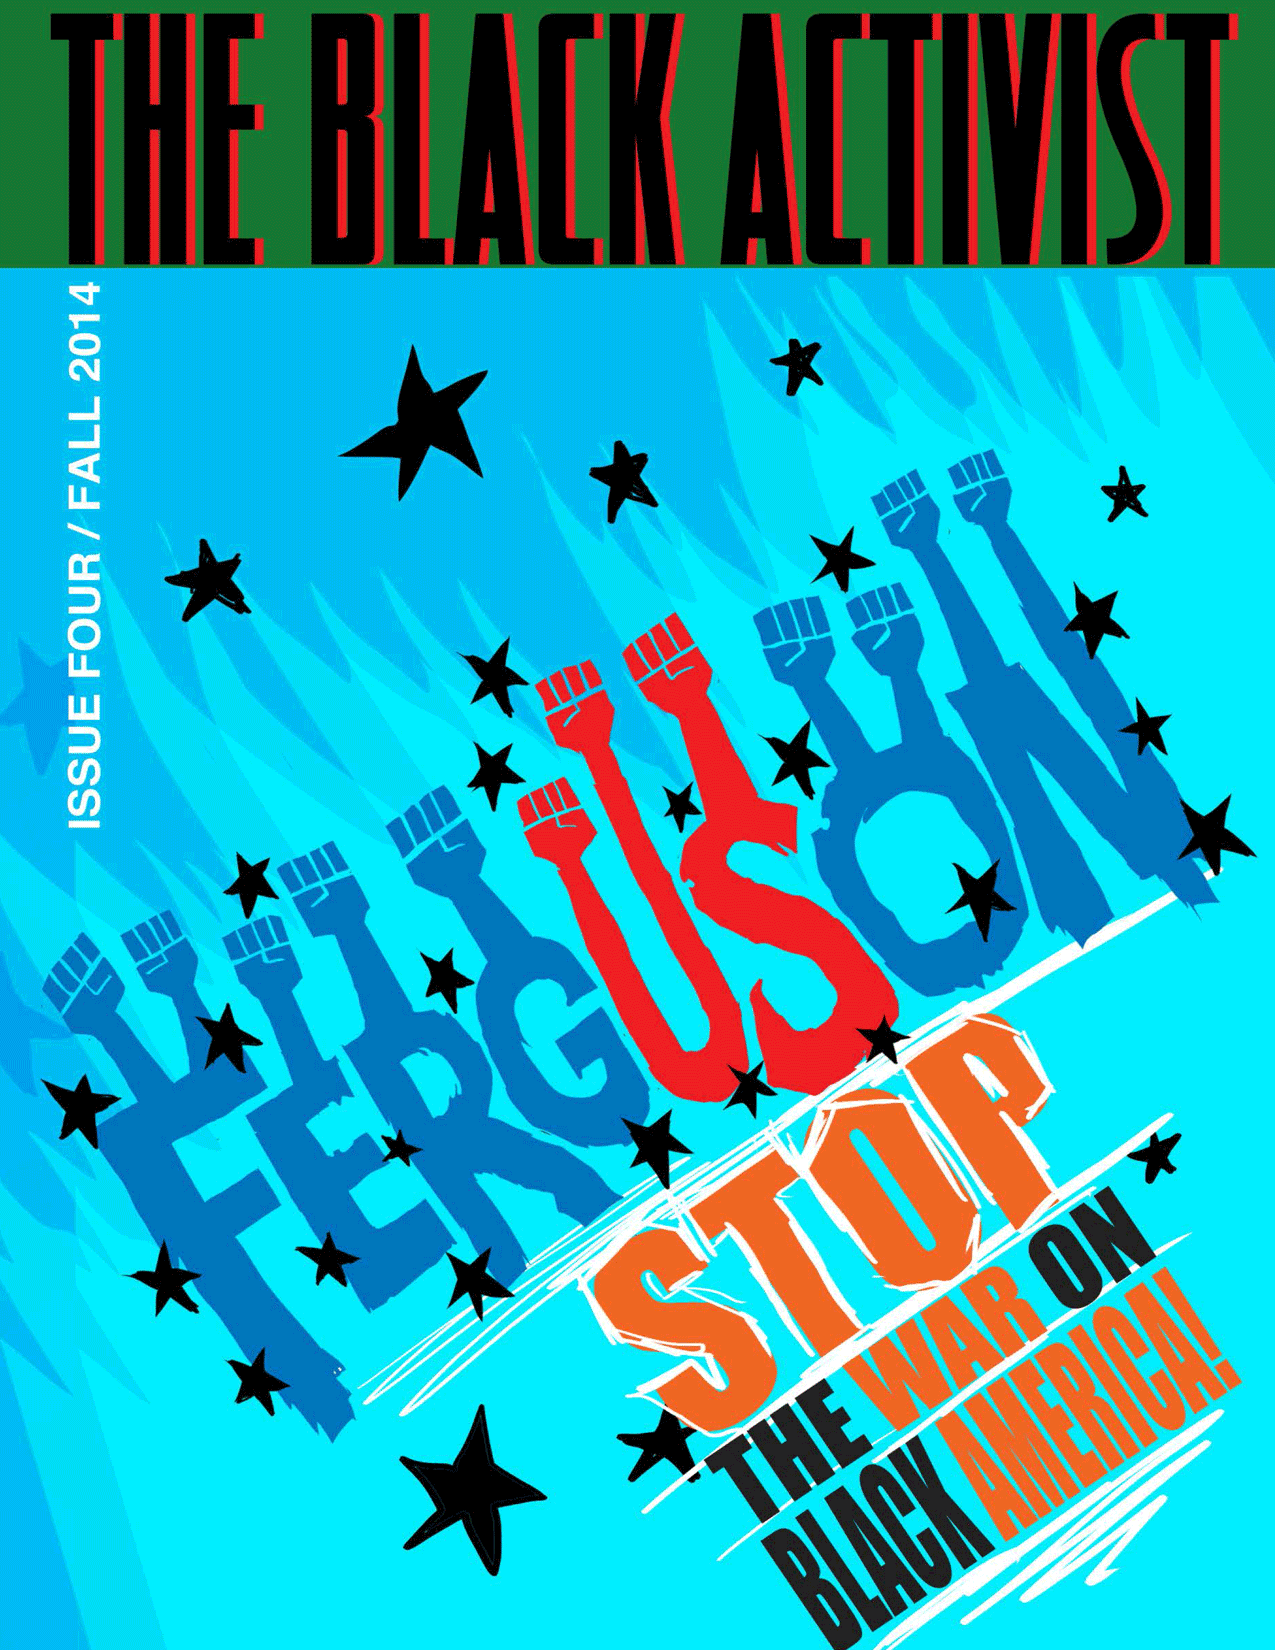 The Black Activist issue 4 front cover